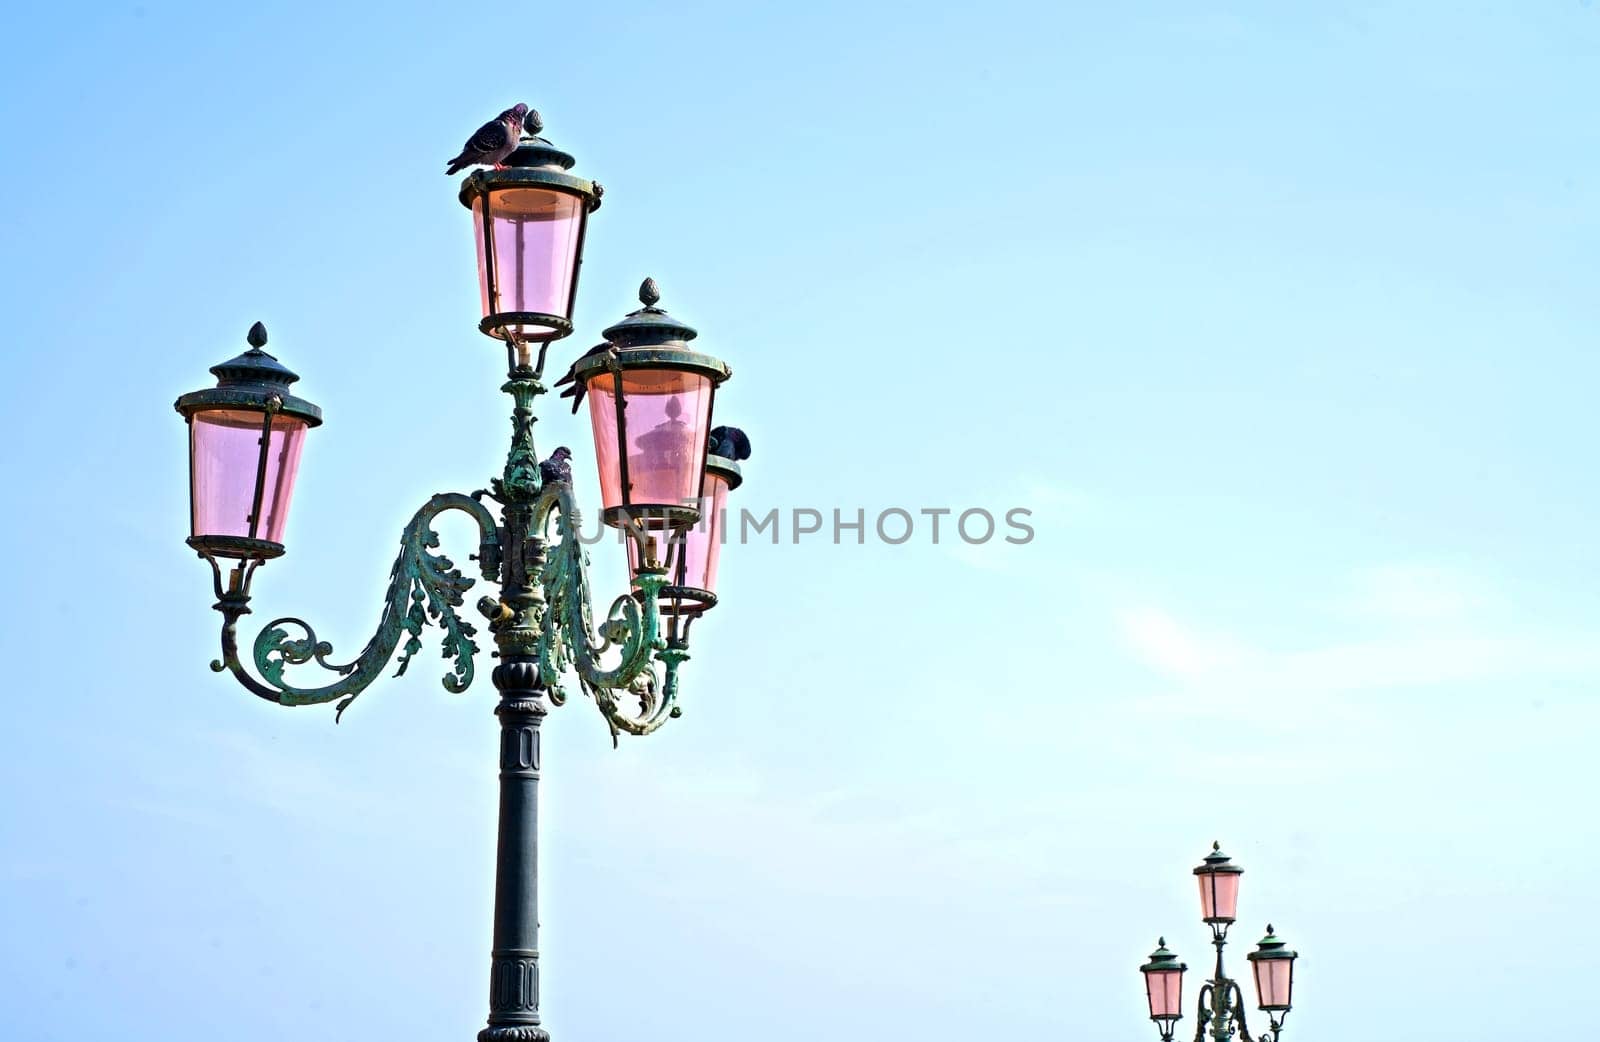 Lantern on the street of Venice. The famous pink lights of Venice. Four lamps with pink glass are on an ornate black metal lamp post.